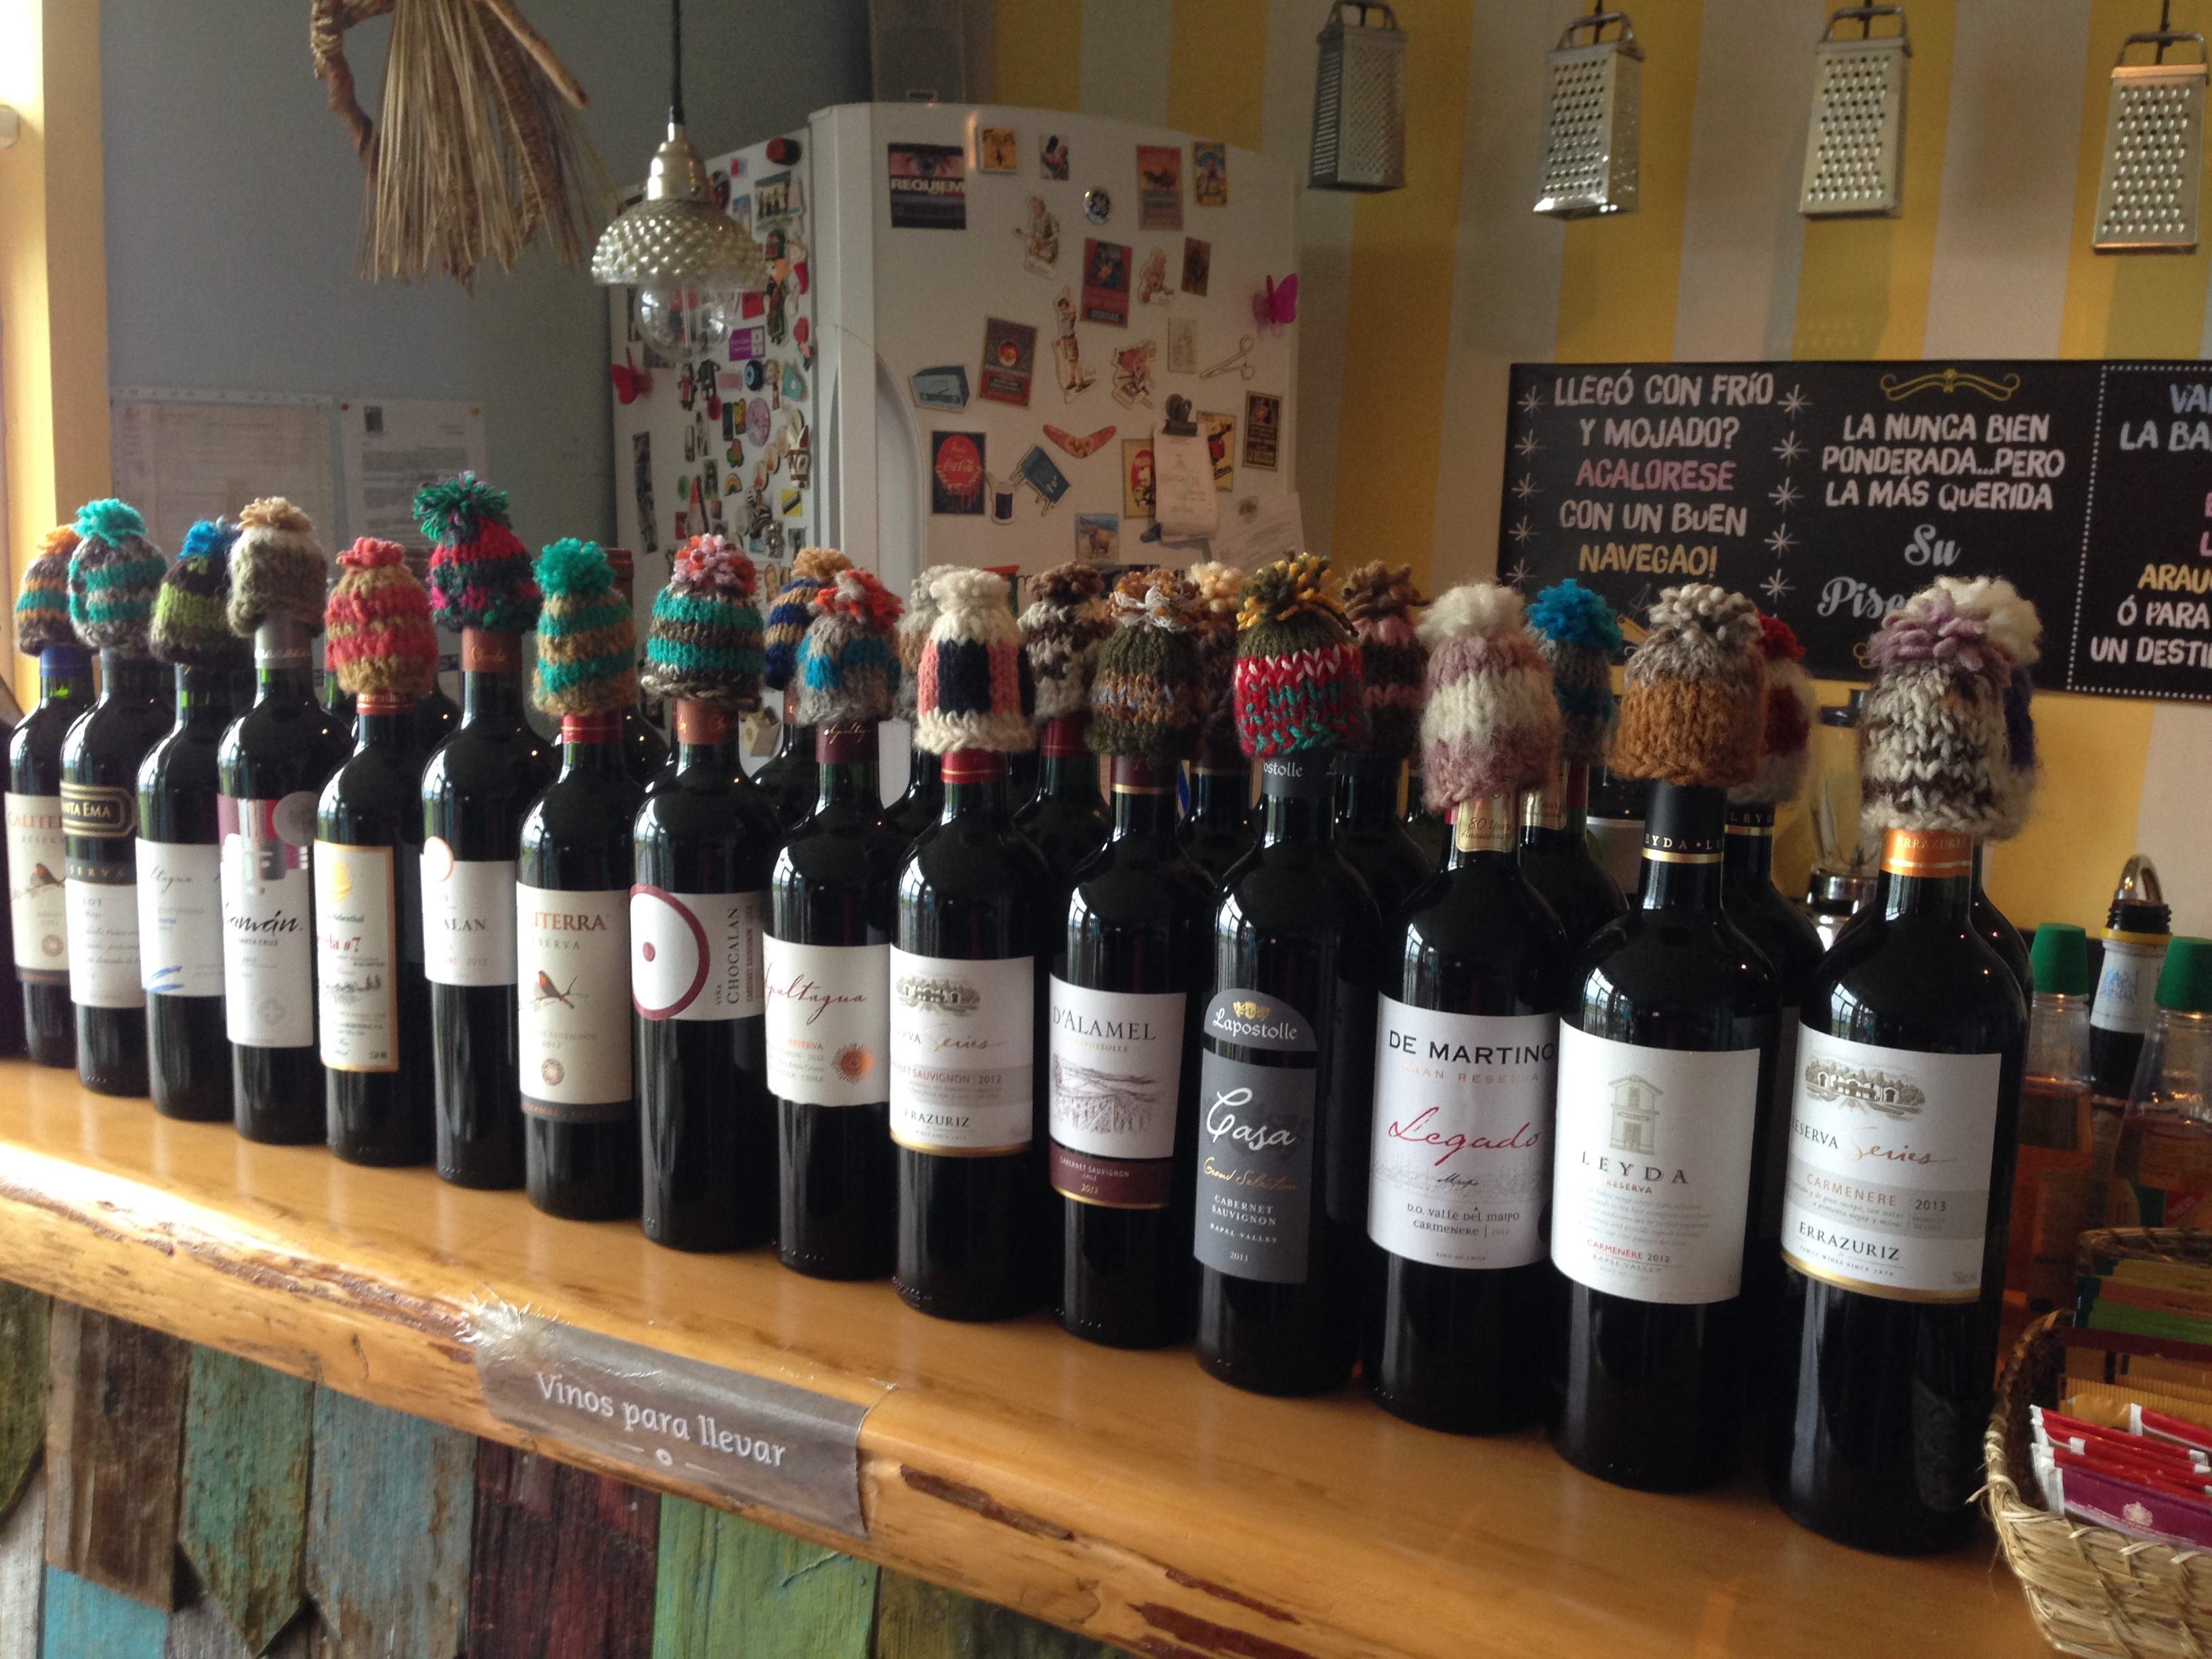 Woolen caps add a touch of quirky flair to wine bottles in Chiloé.